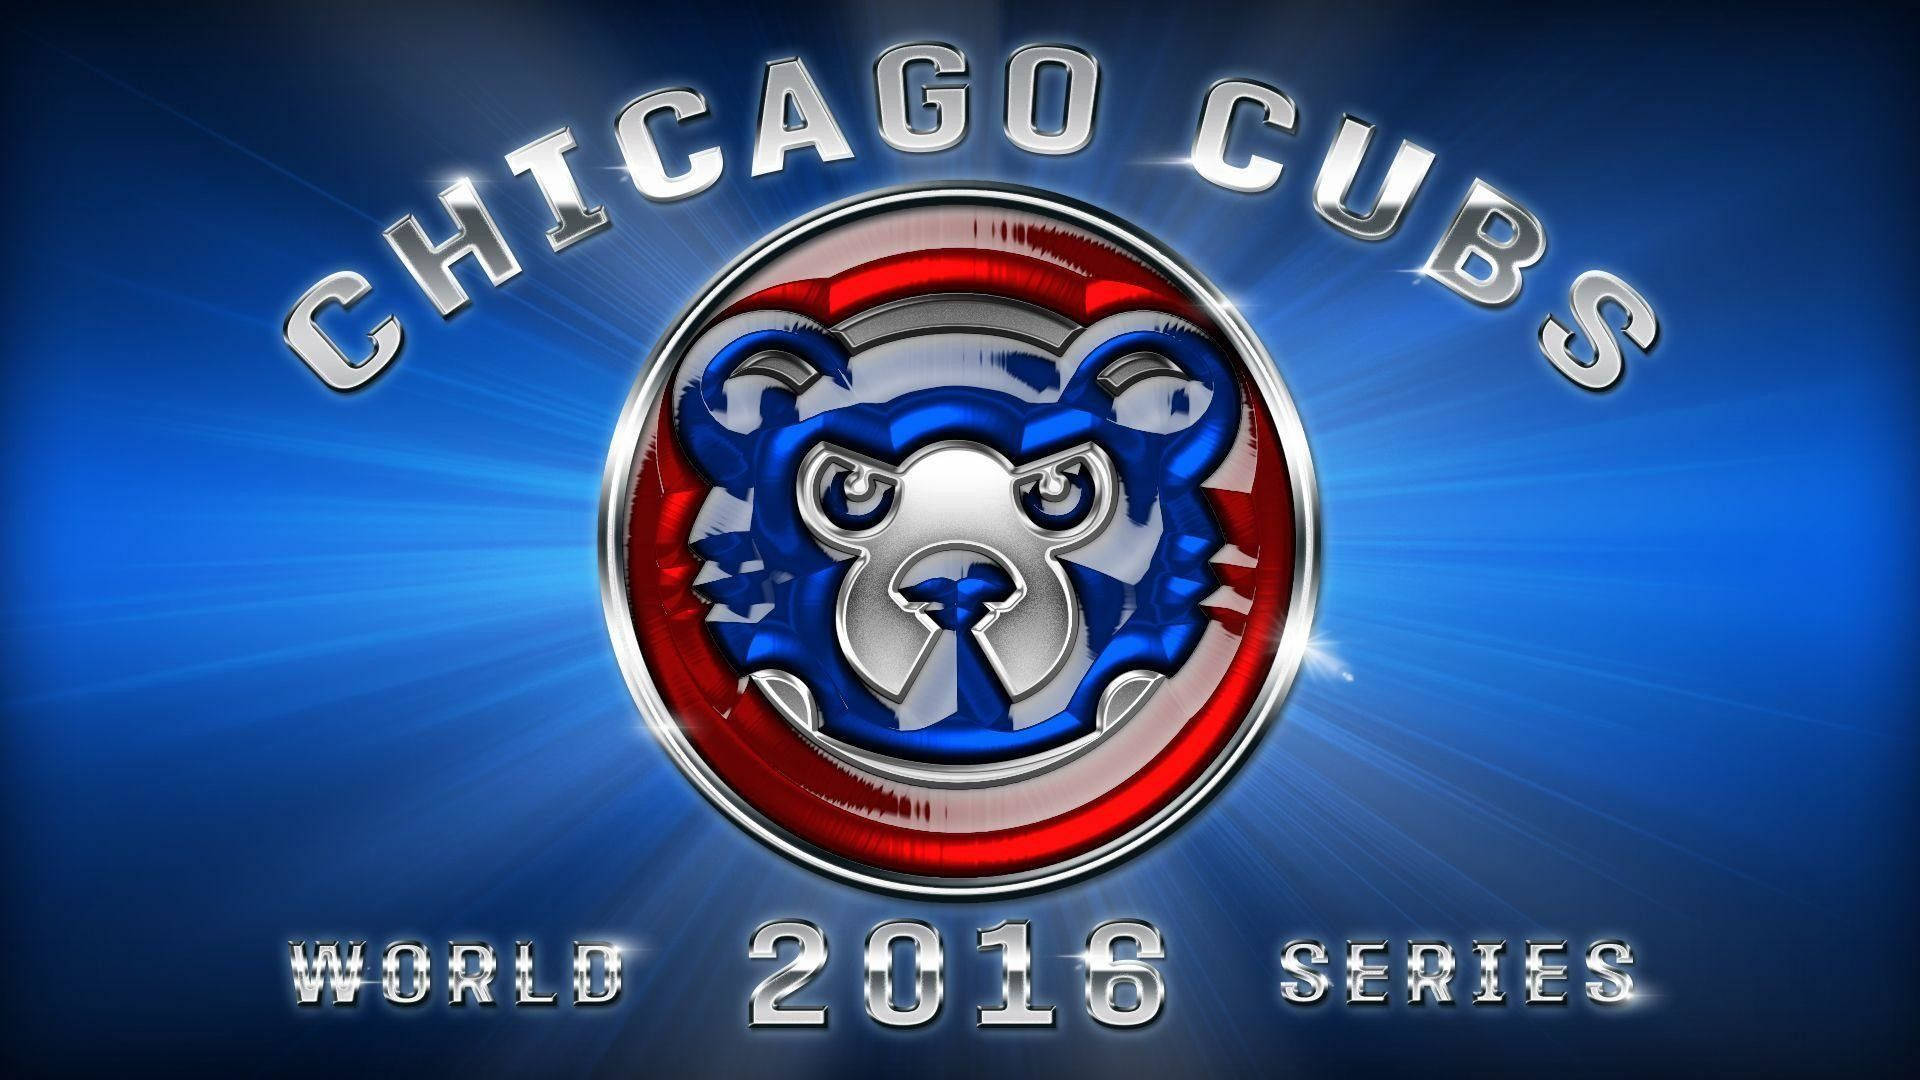 Chicago Cubs World 2016 Series Background